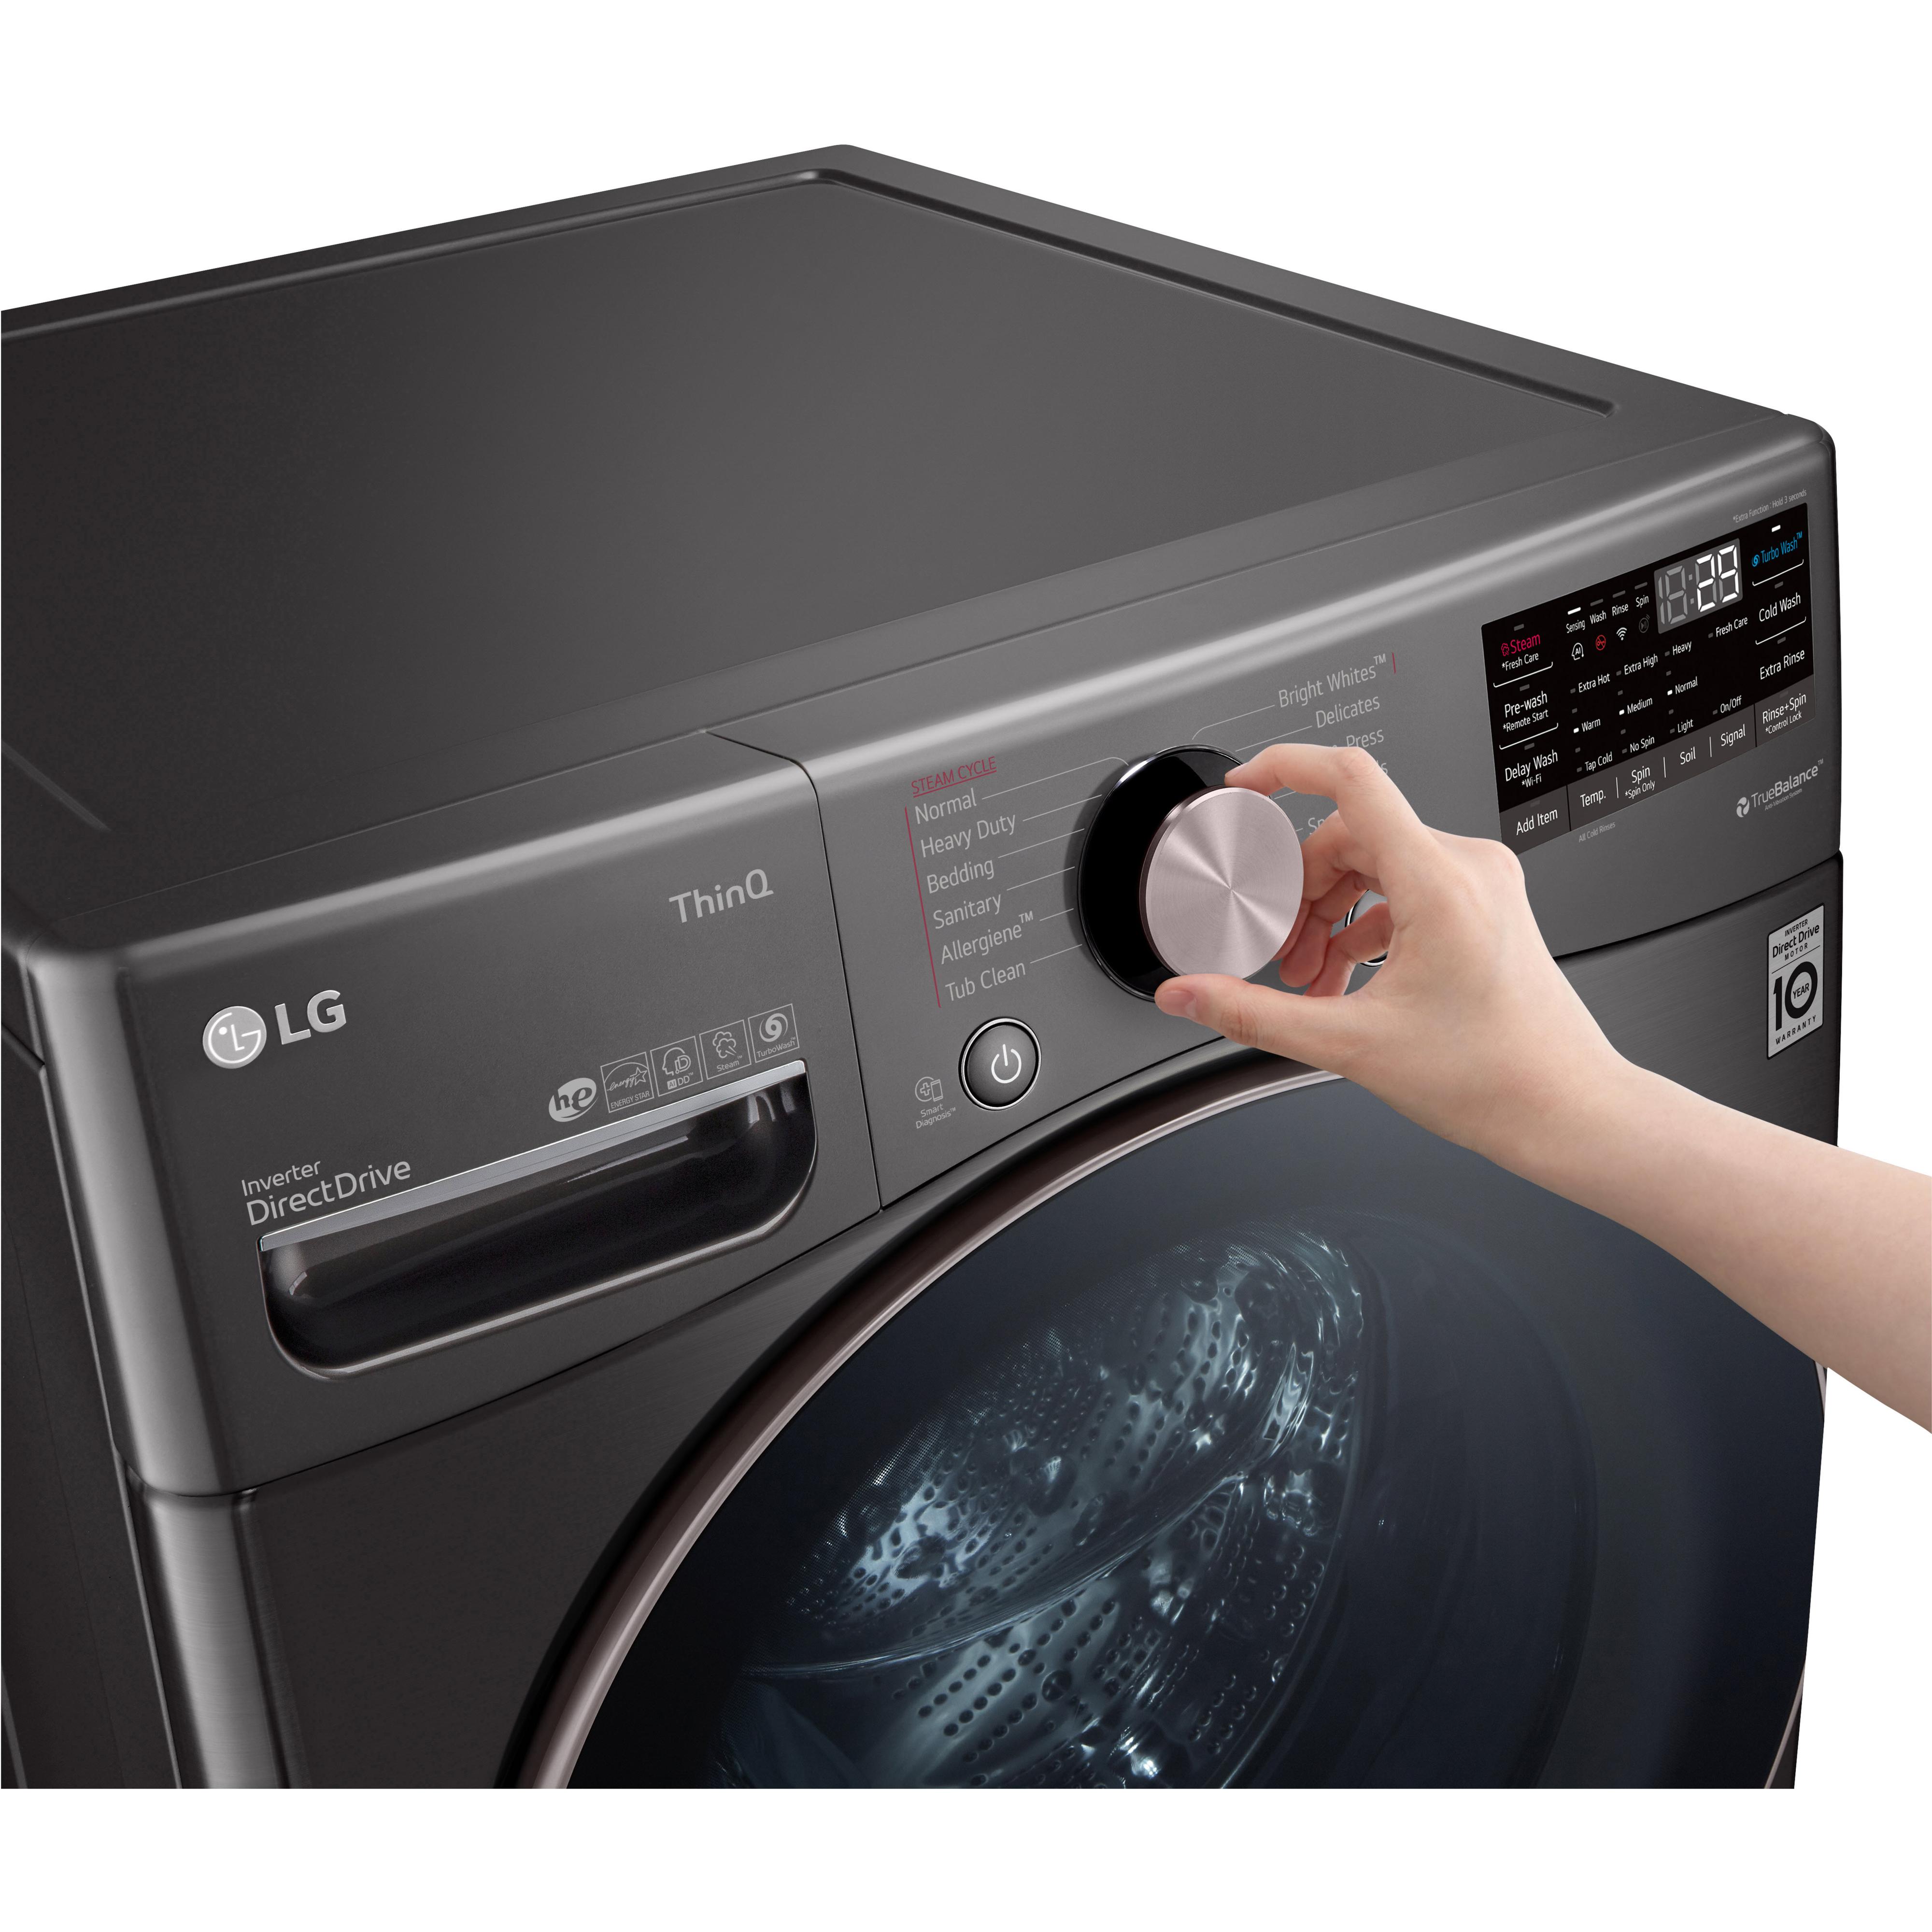 LG 4.5 cu.ft. Front Loading Washer with ColdWash? Technology WM4000HBA